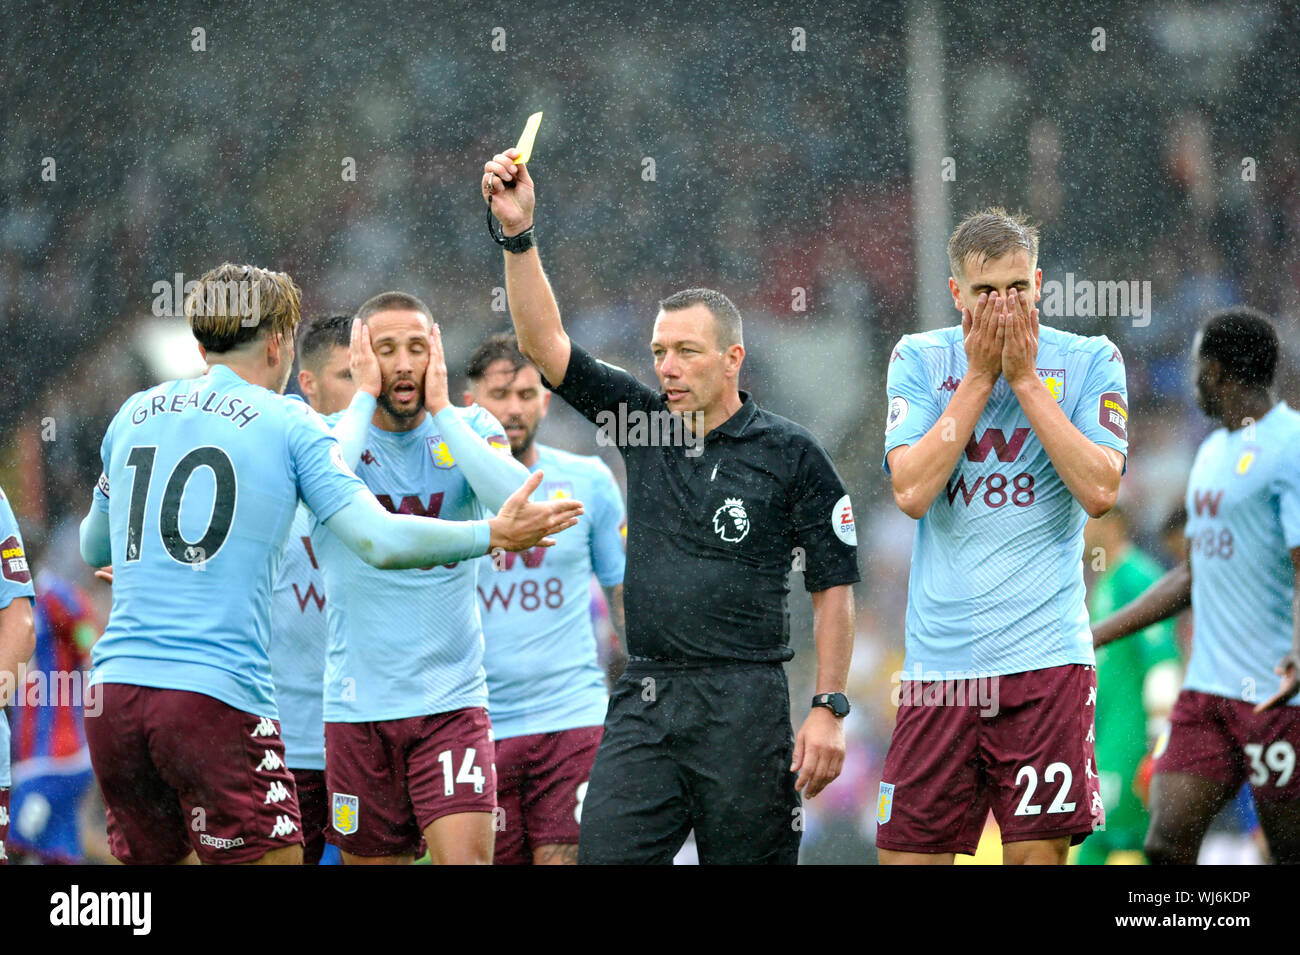 Jack Grealish of Aston Villa gets a yellow card from referee Kevin Friend during the Premier League match between Crystal Palace and Aston Villa at Selhurst Park , London , 31 August 2019 Photo Simon Dack / Telephoto Images.  Editorial use only. No merchandising. For Football images FA and Premier League restrictions apply inc. no internet/mobile usage without FAPL license - for details contact Football Dataco Stock Photo